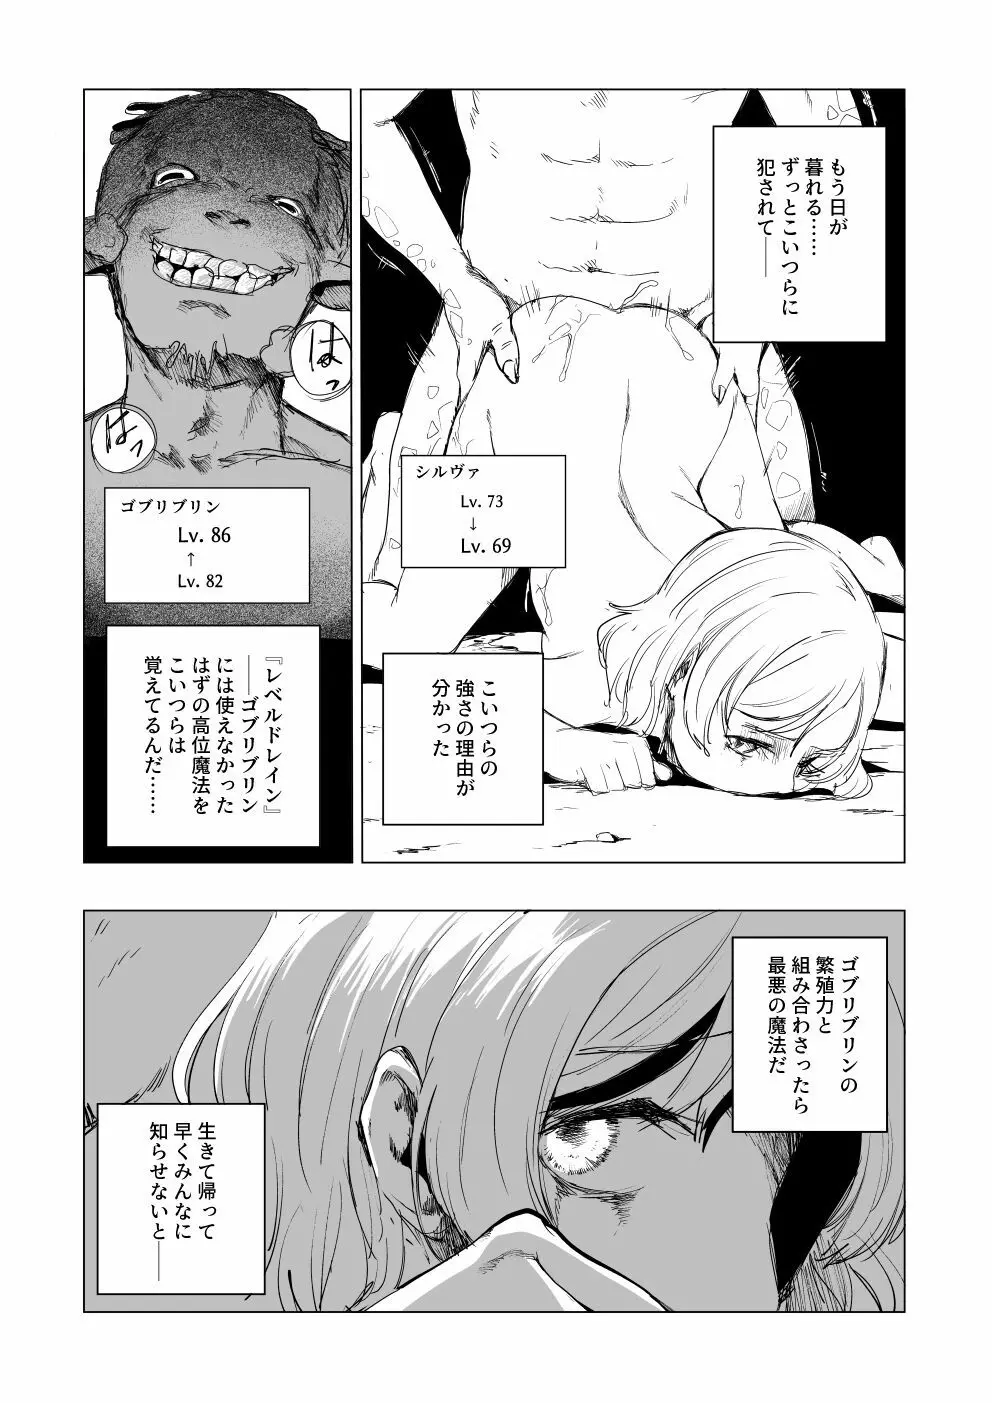 『Lv.1』 - page9